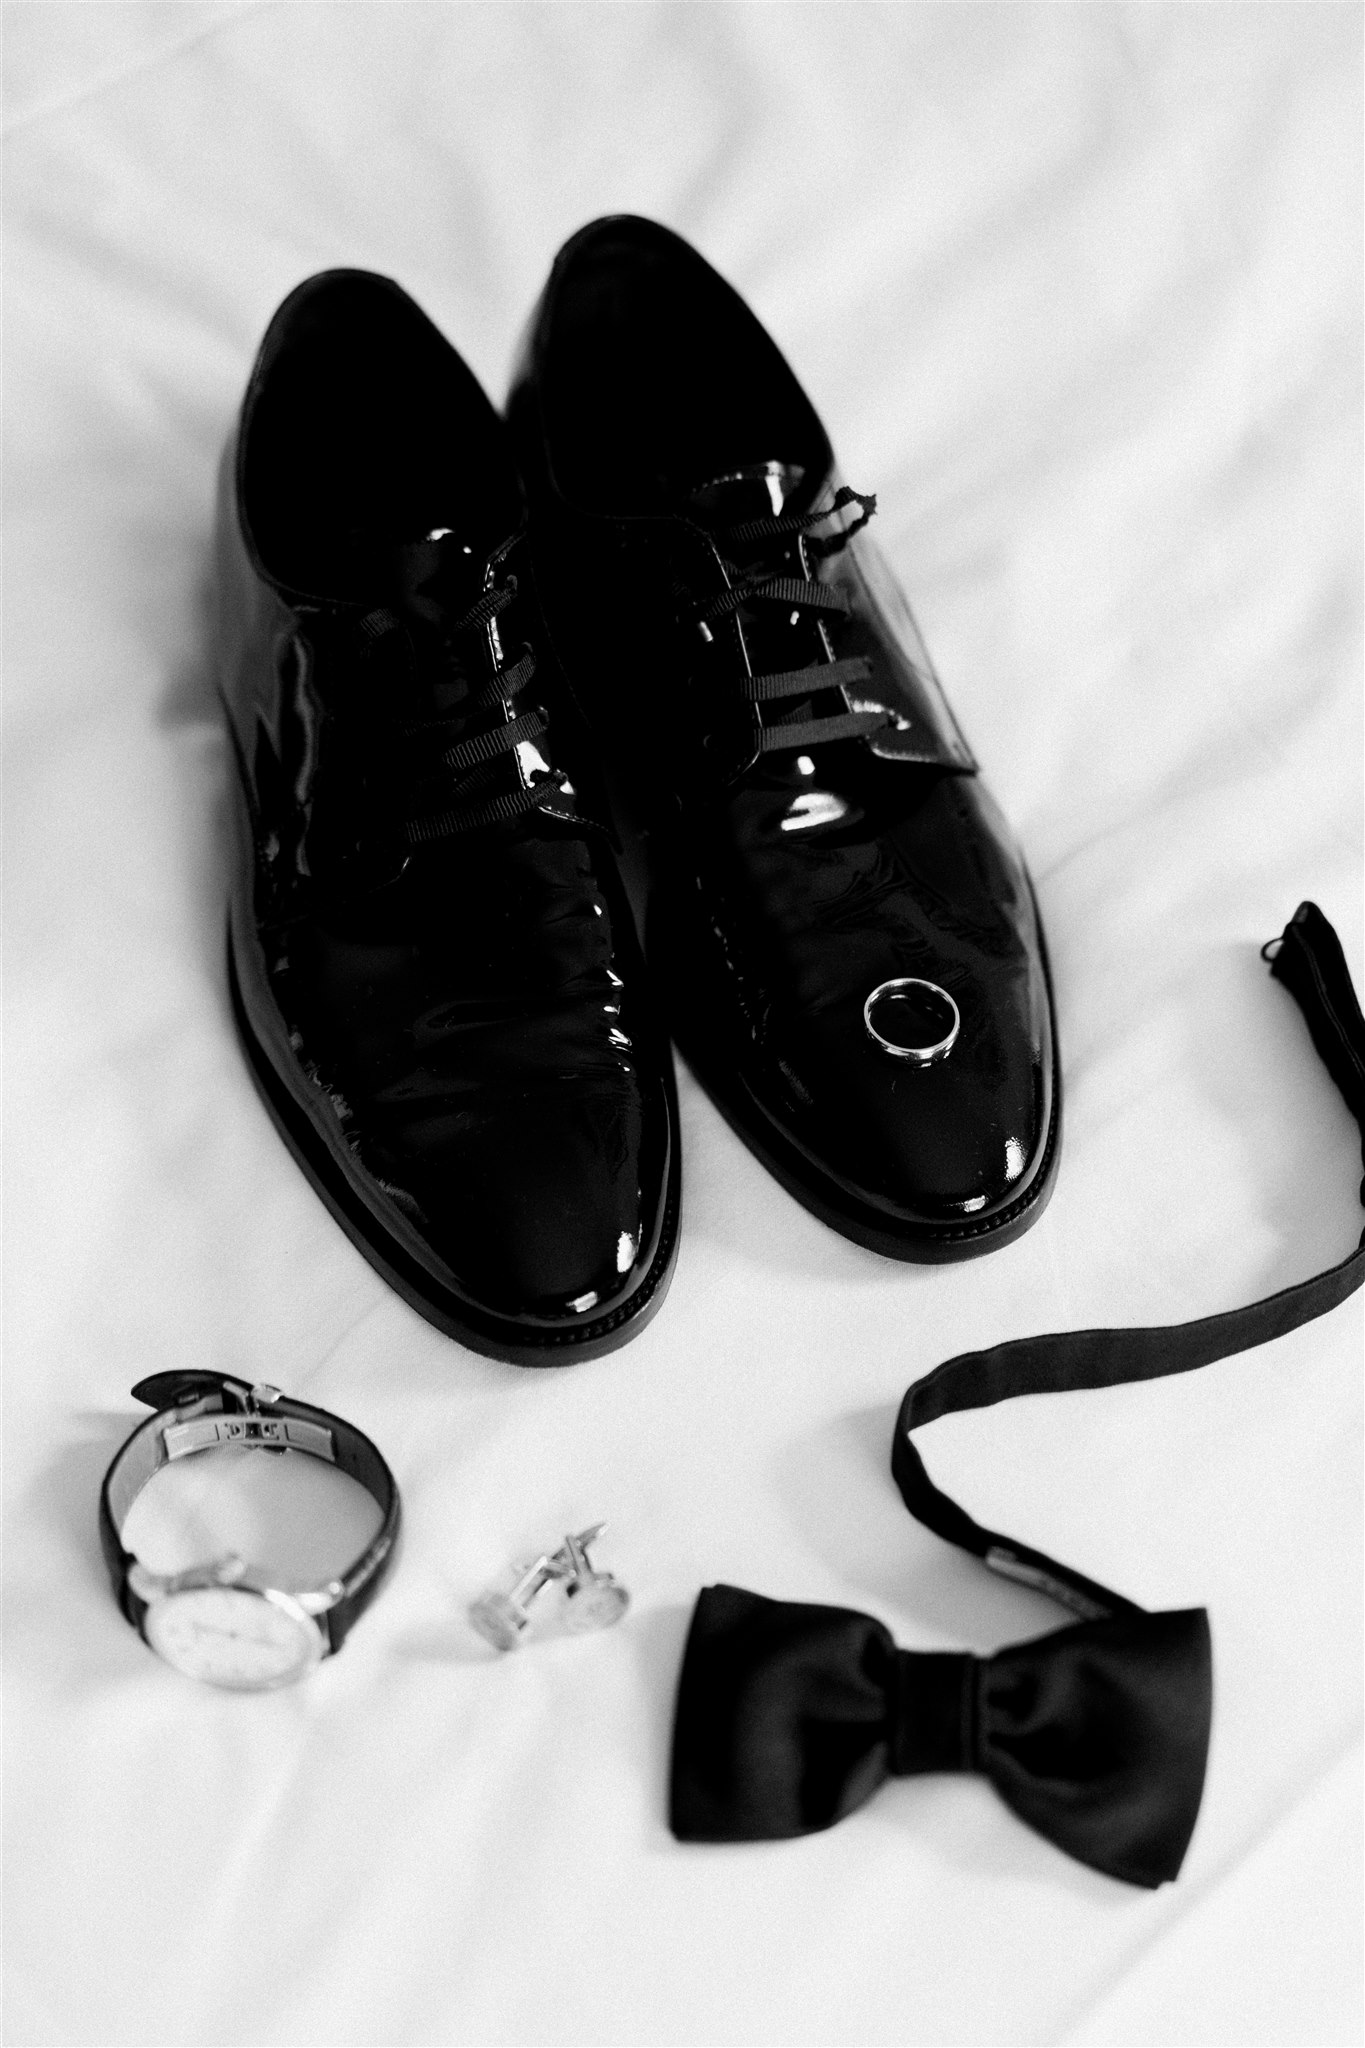 The grooms details: shoes, bowtie, watch, cufflinks